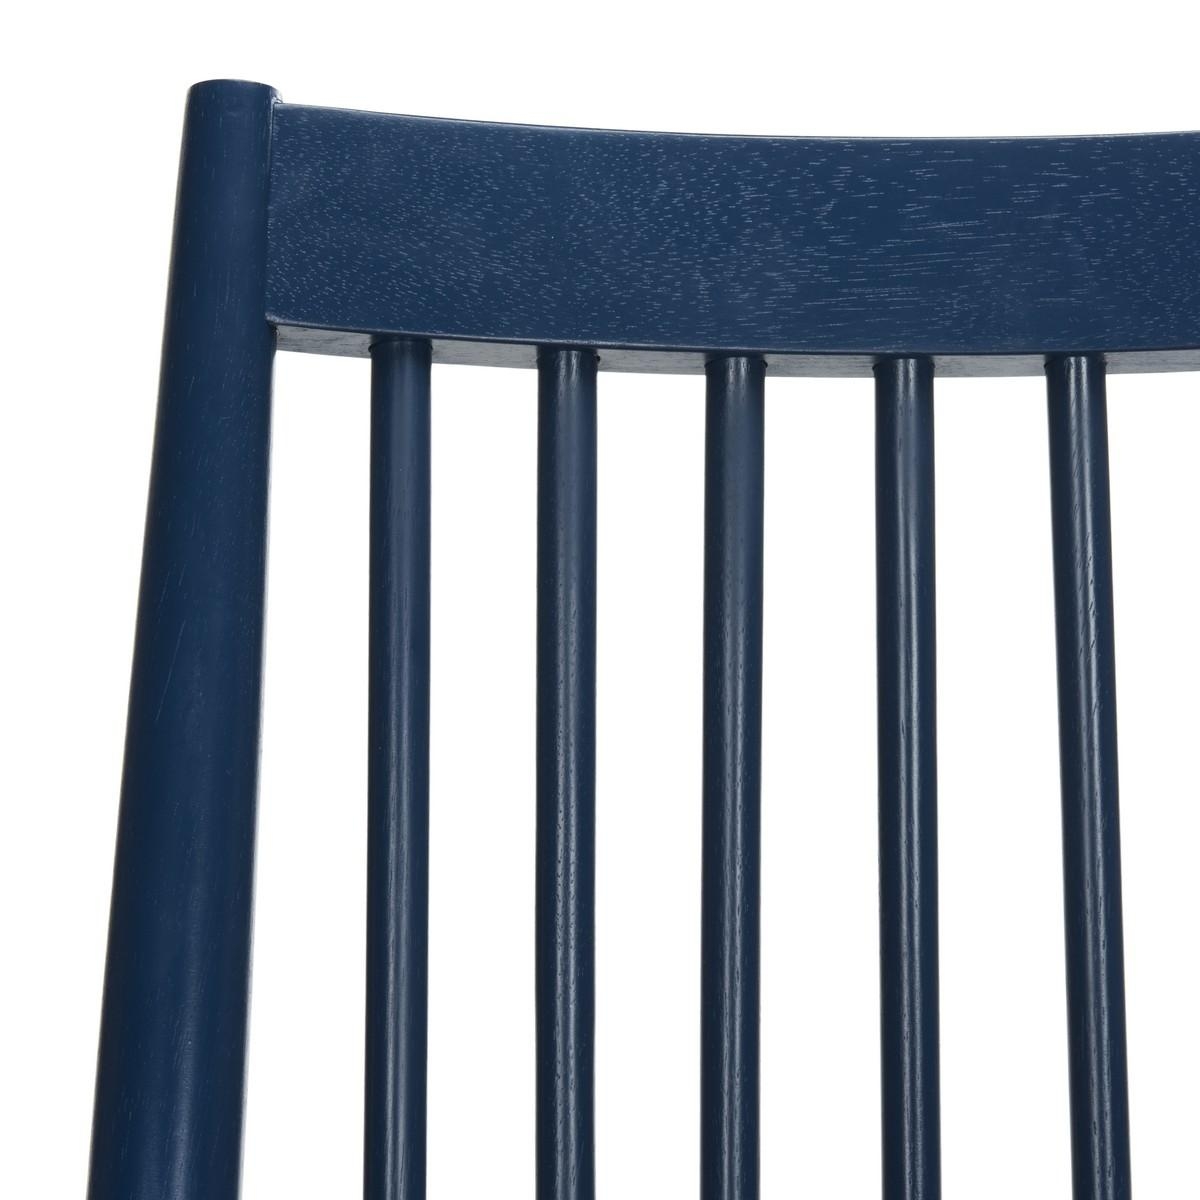 Wren 19"H Spindle Dining Chair - Navy - Safavieh - Image 3